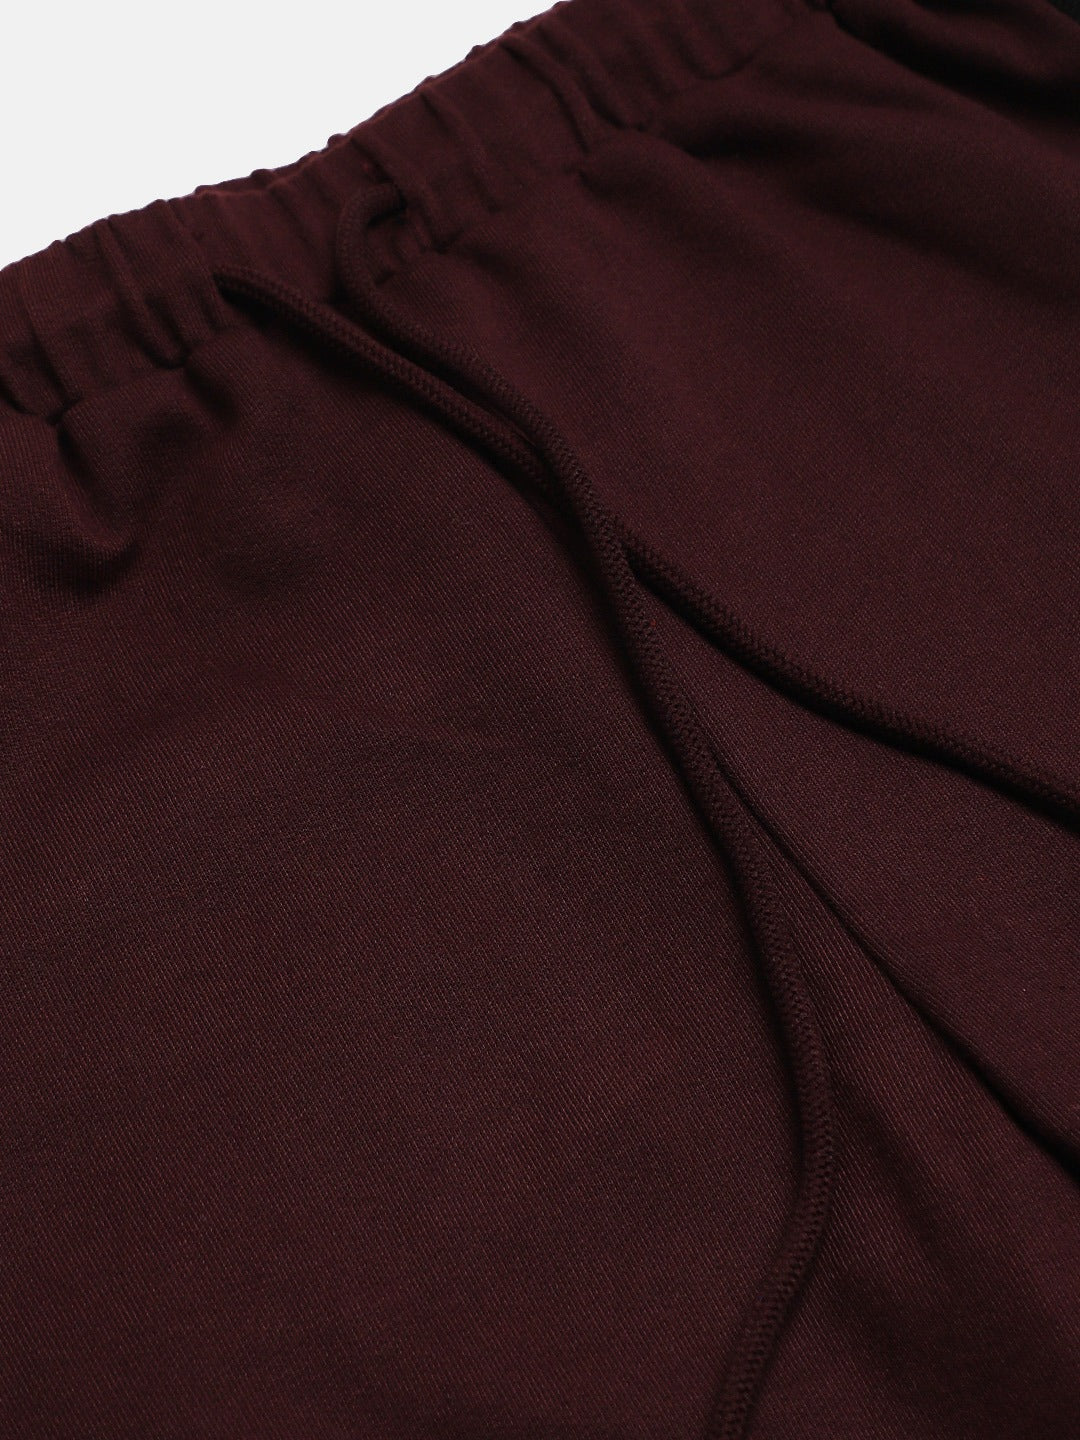 Girls Burgundy Terry Side Tape Track Pants